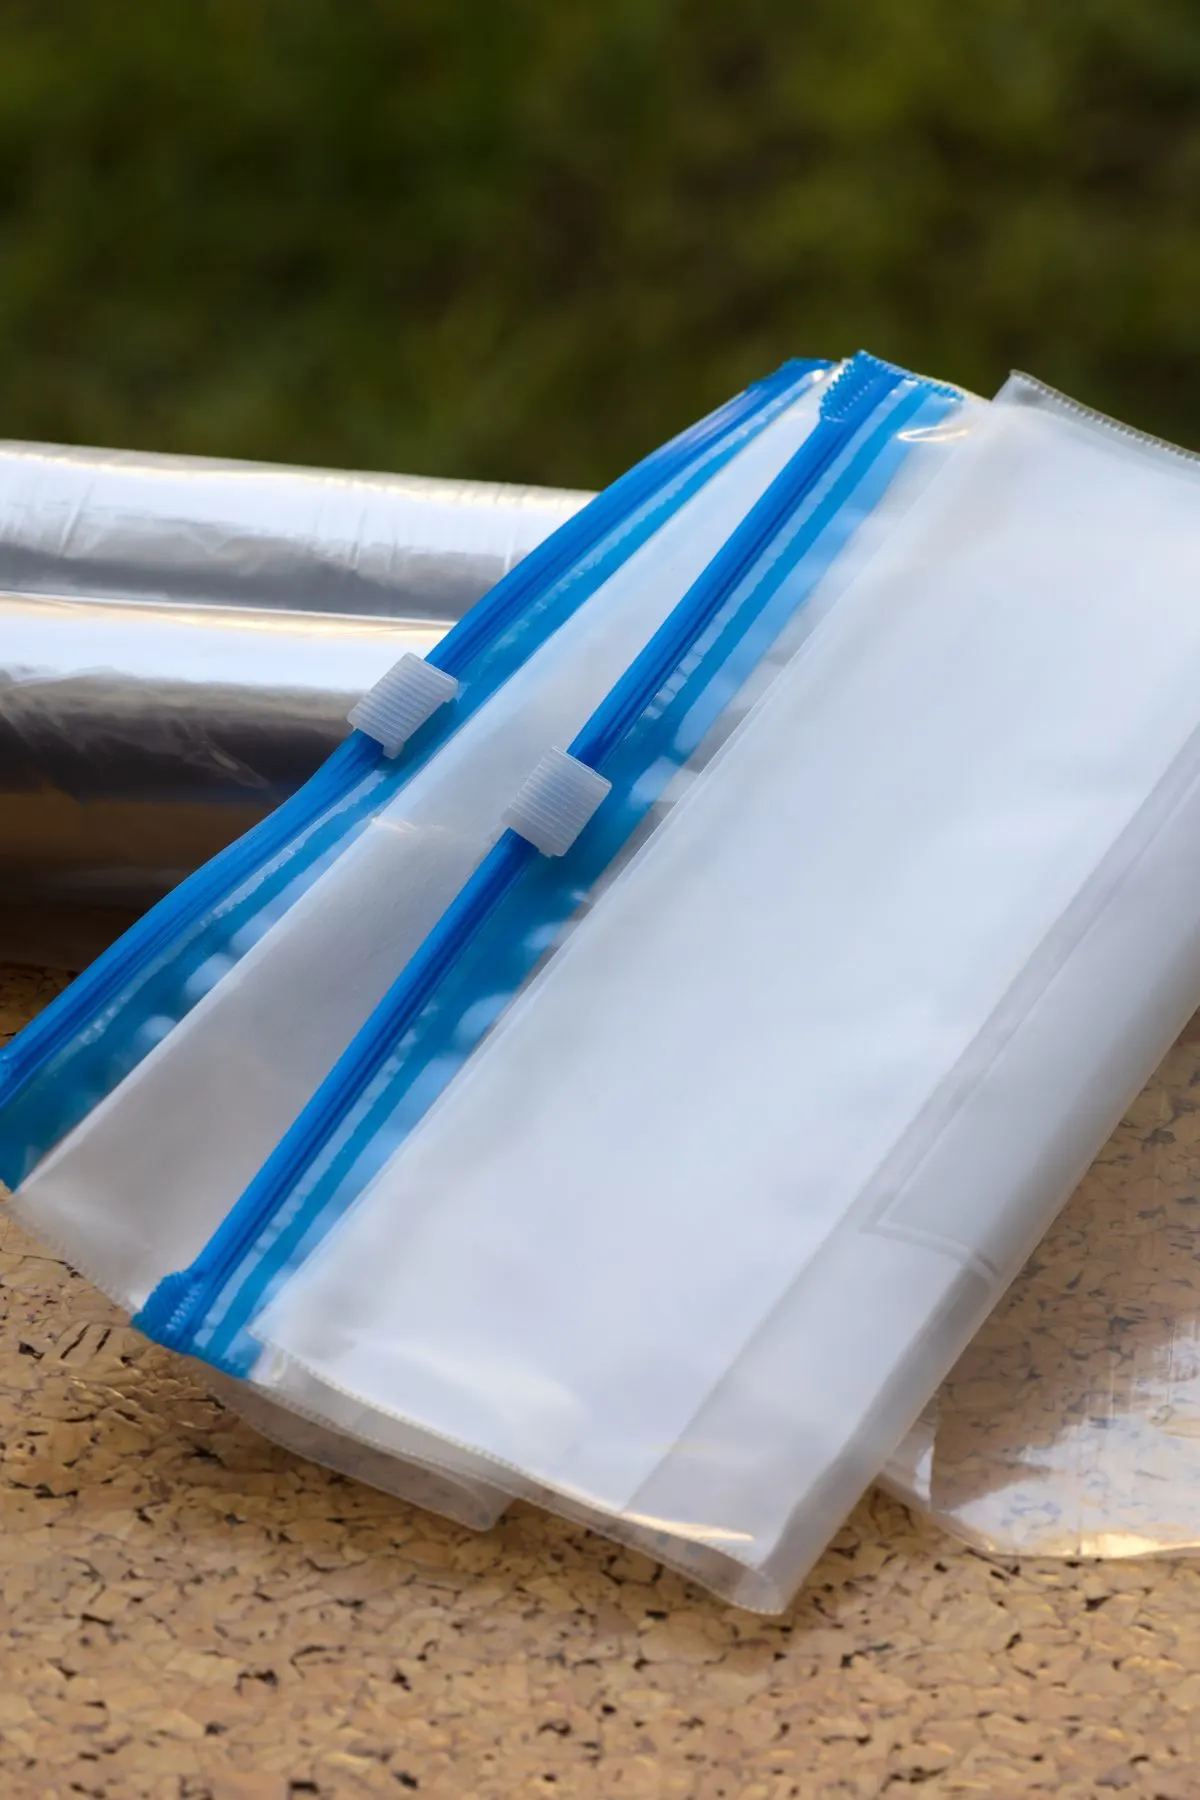 Pile of Ziploc storage bags with blue trim on a counter with plastic wrap.